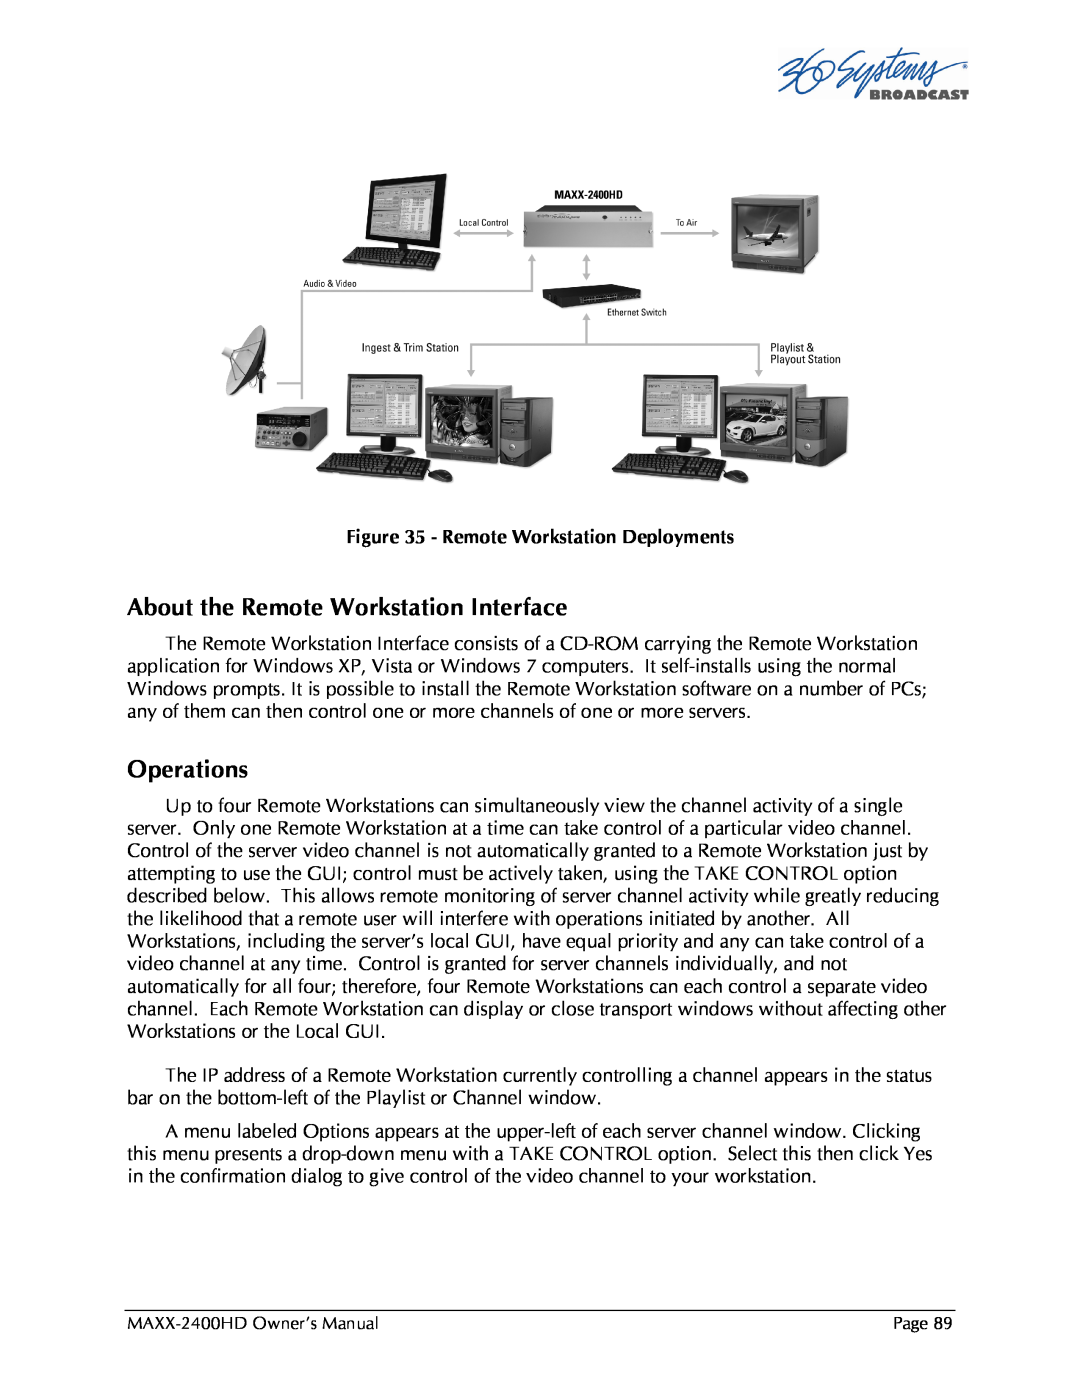 Maxxsonics MAXX-2400HD manual About the Remote Workstation Interface, Operations 